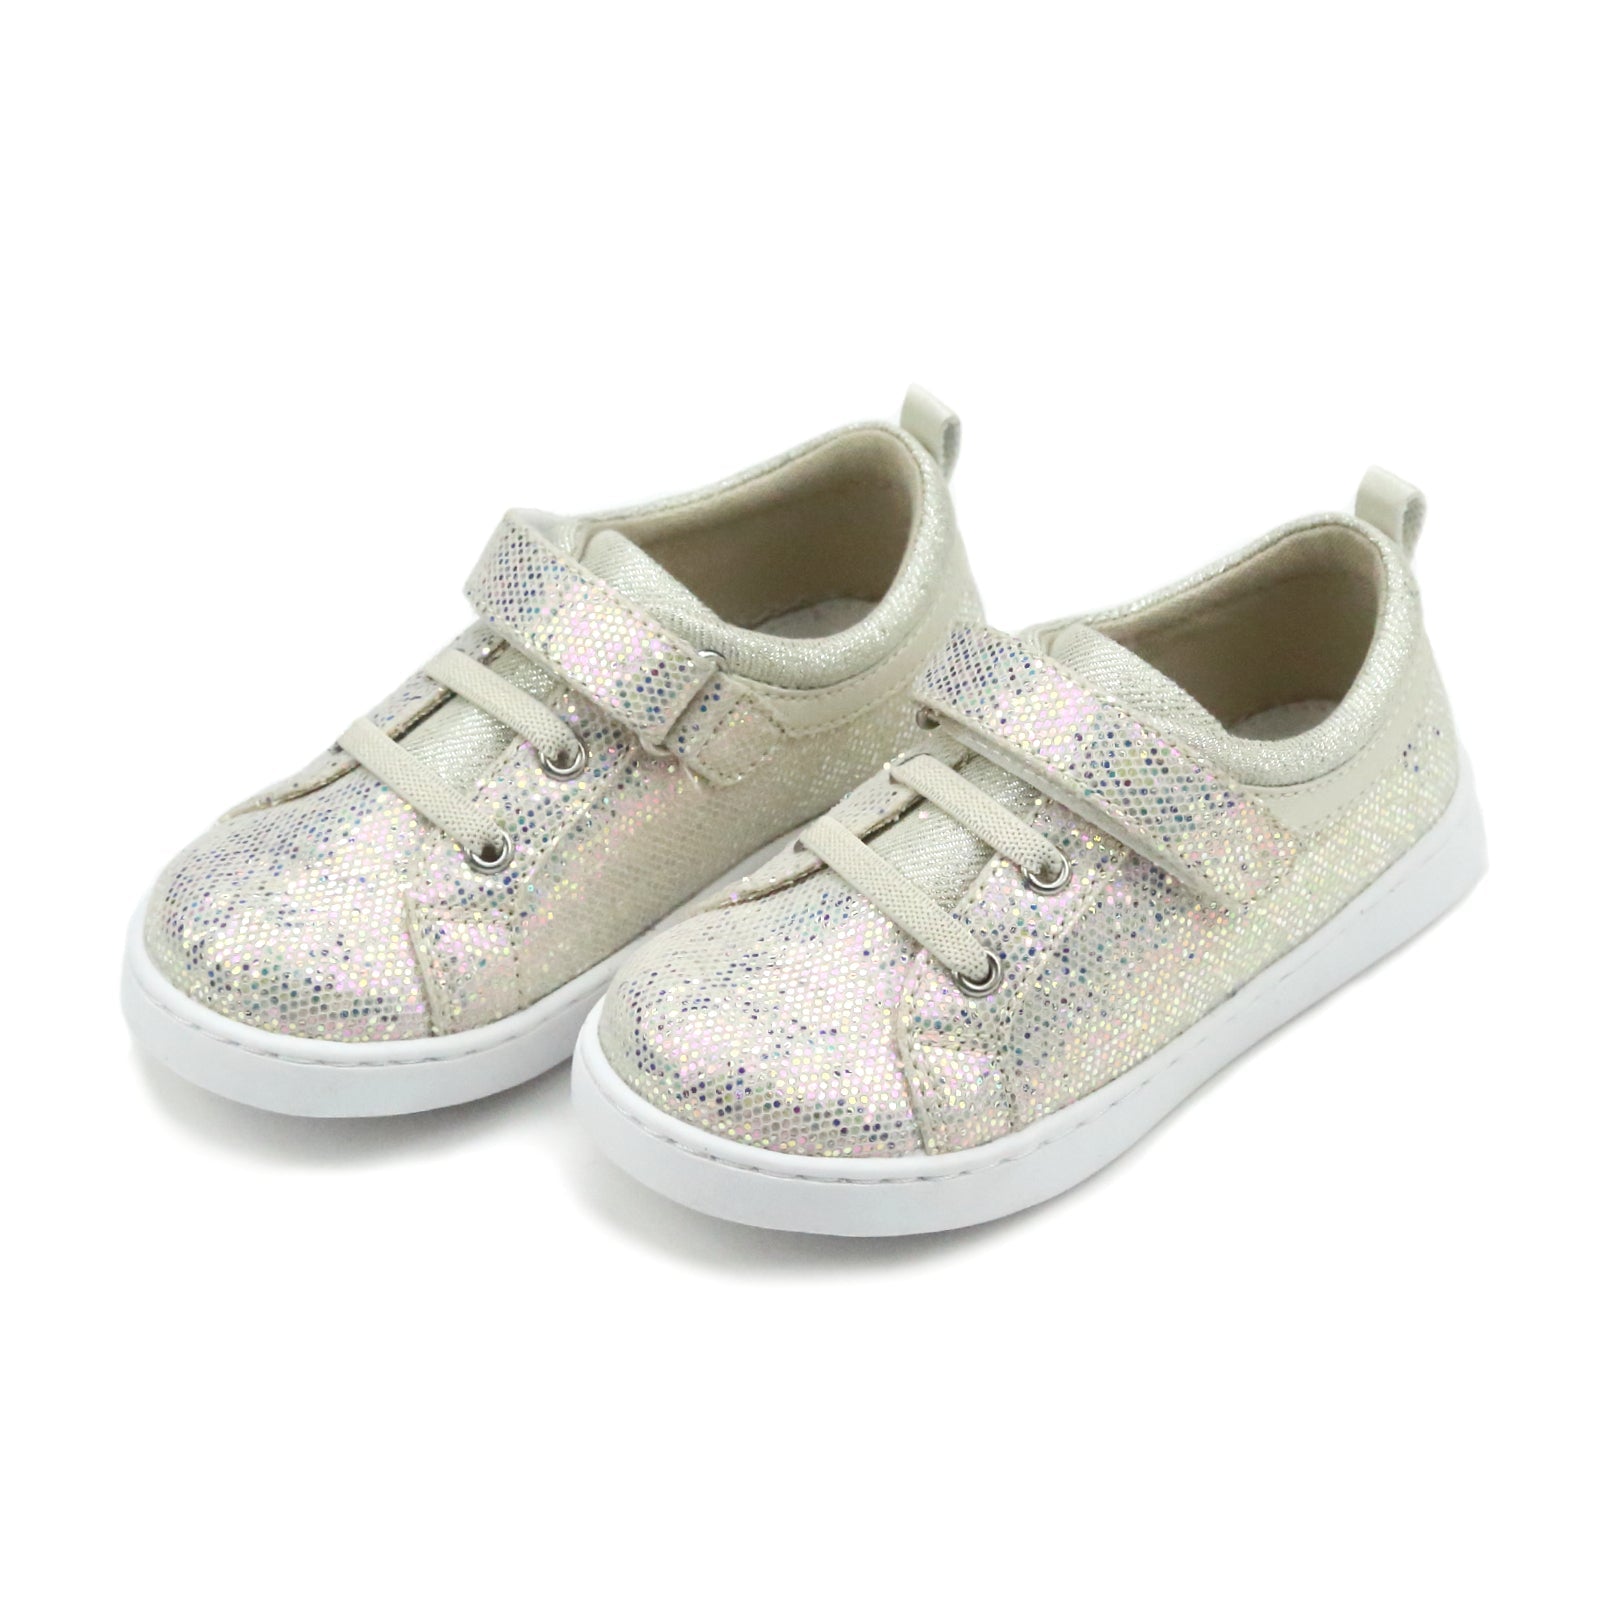 L'Amour Natalie Sneaker - Silver